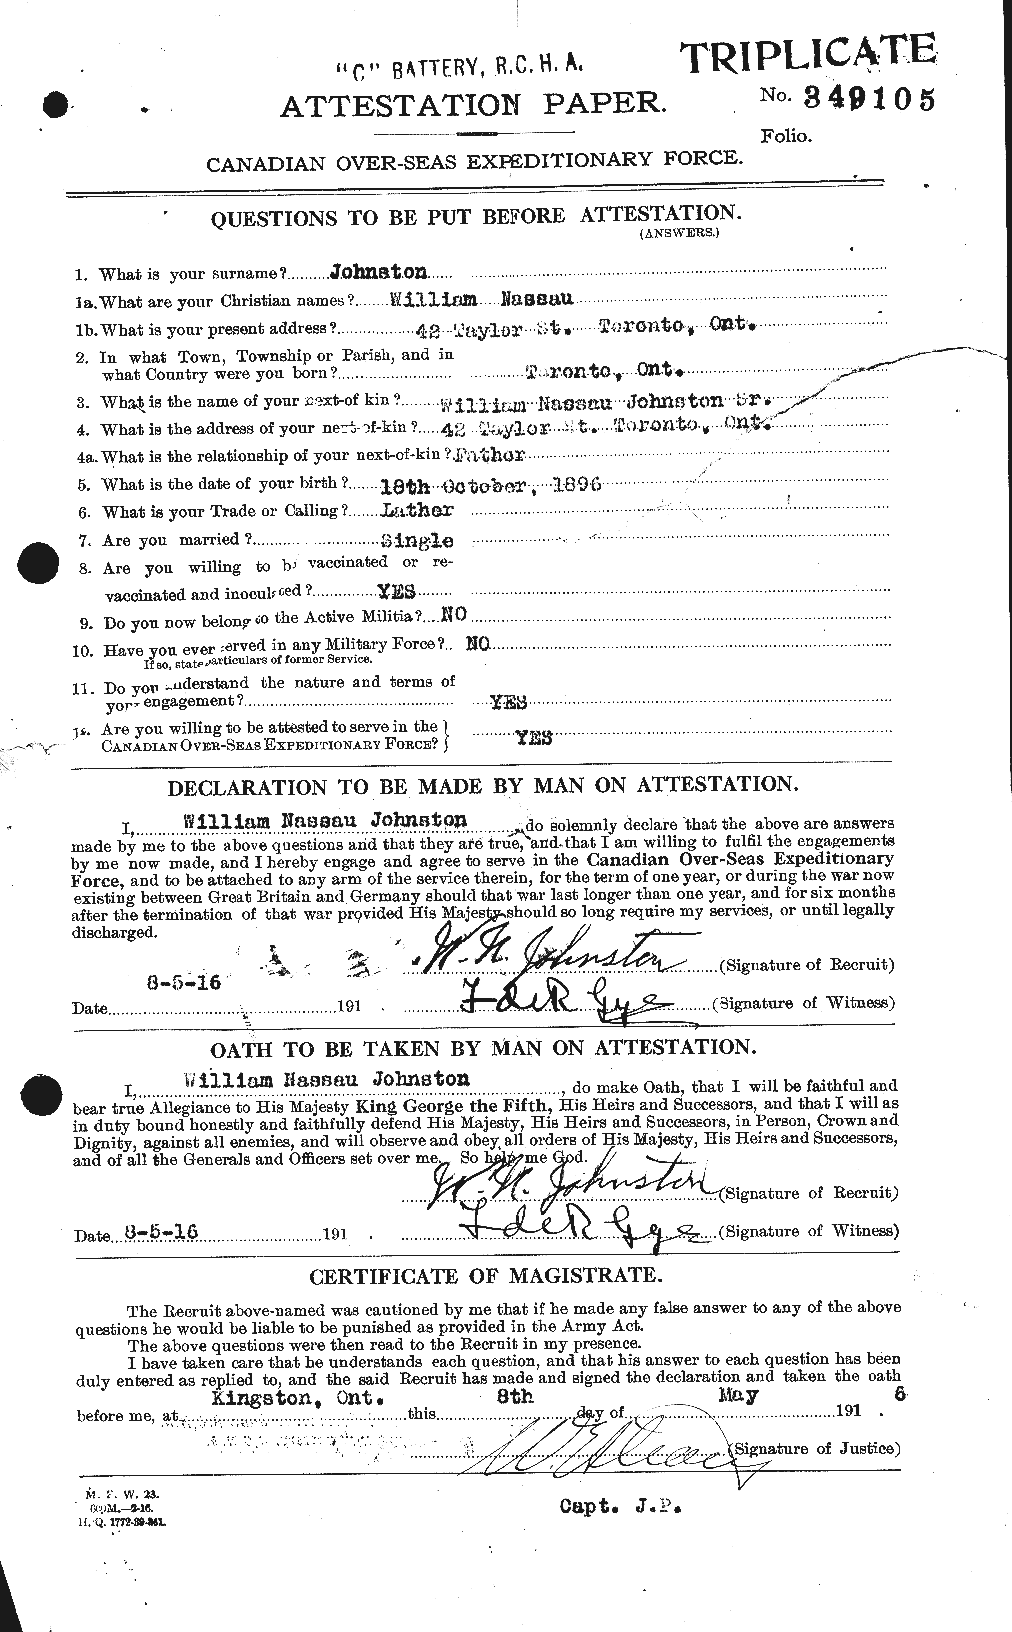 Personnel Records of the First World War - CEF 429607a